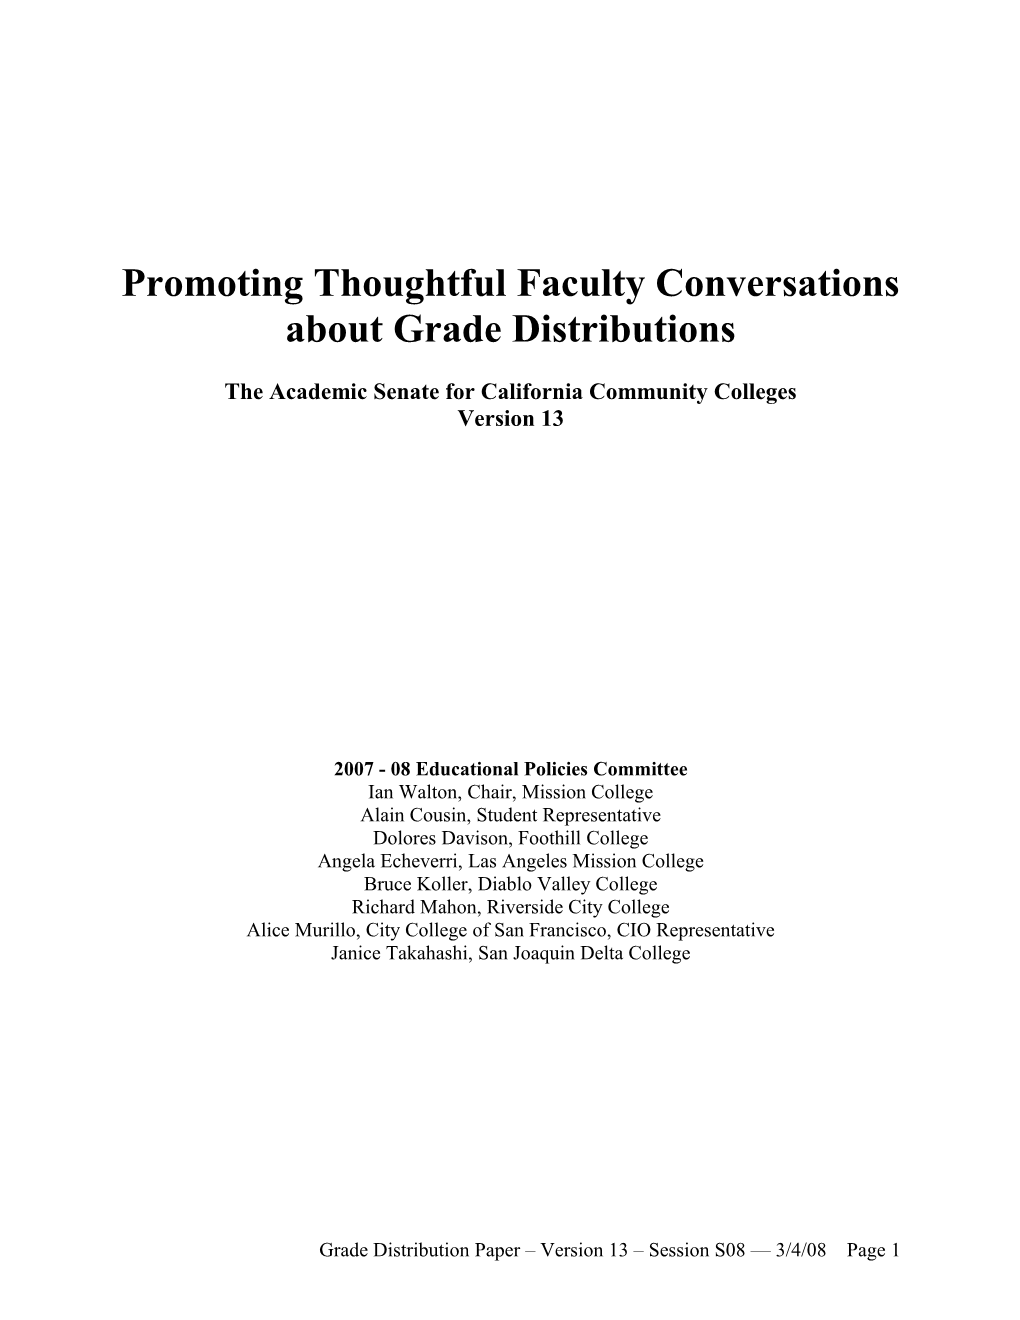 Promoting Thoughtful Faculty Conversations About Grade Distributions